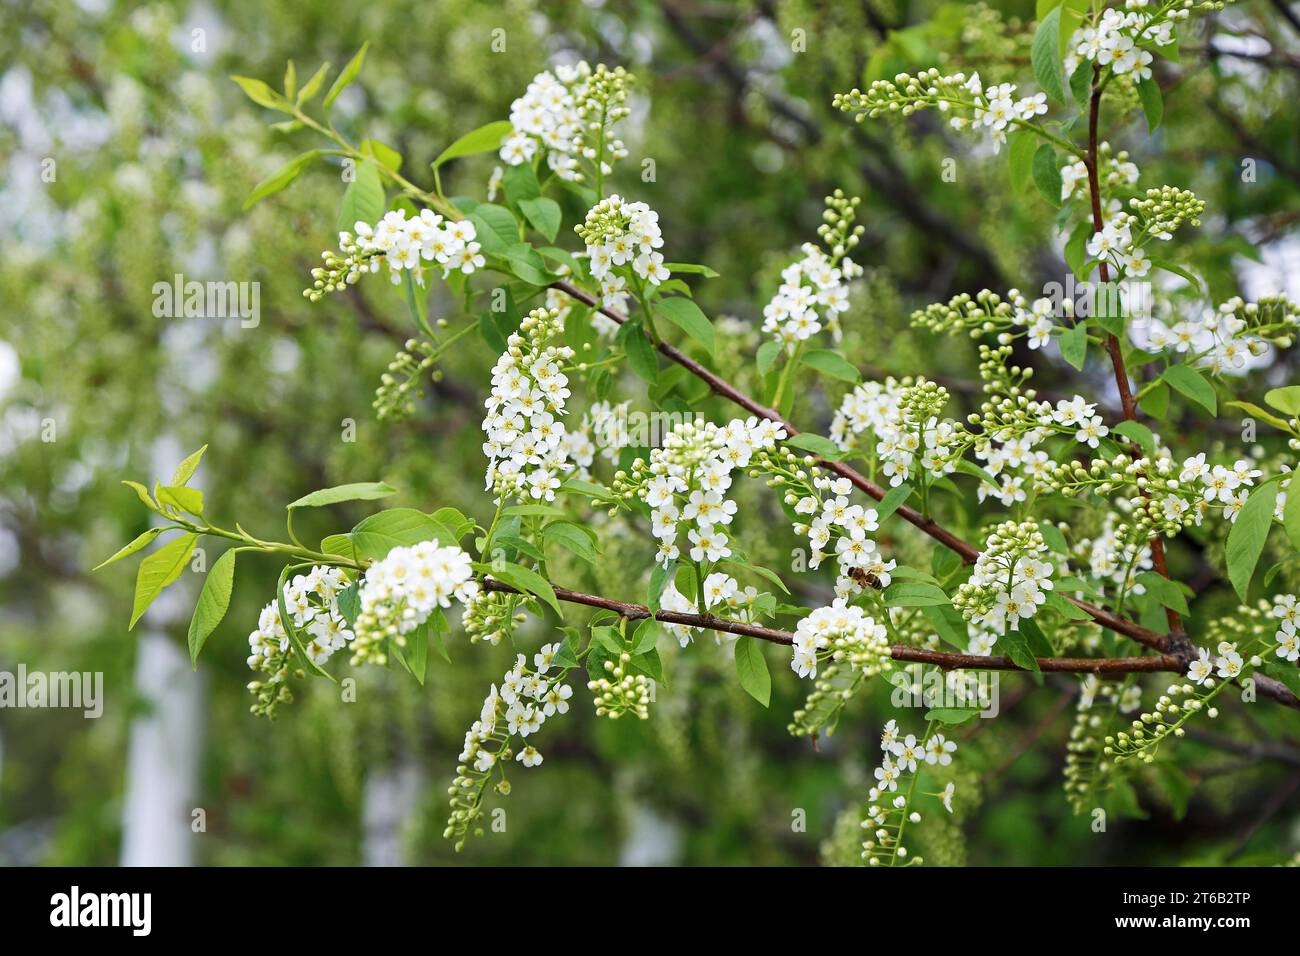 The branch with Black cherry blossom Stock Photo - Alamy